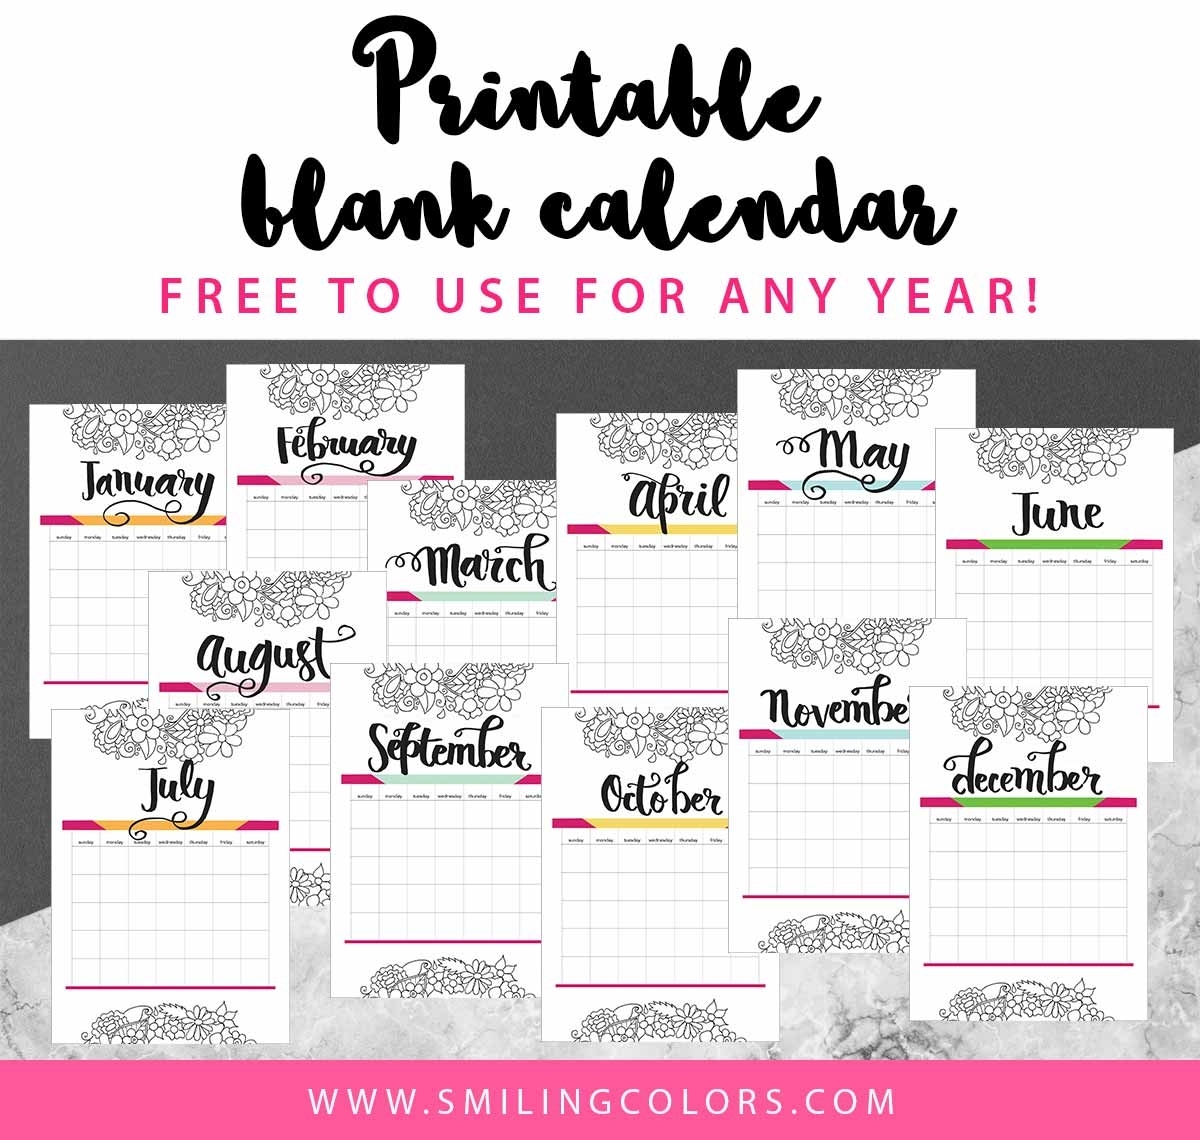 Printable Blank Calendar - Free To Use For Any Year